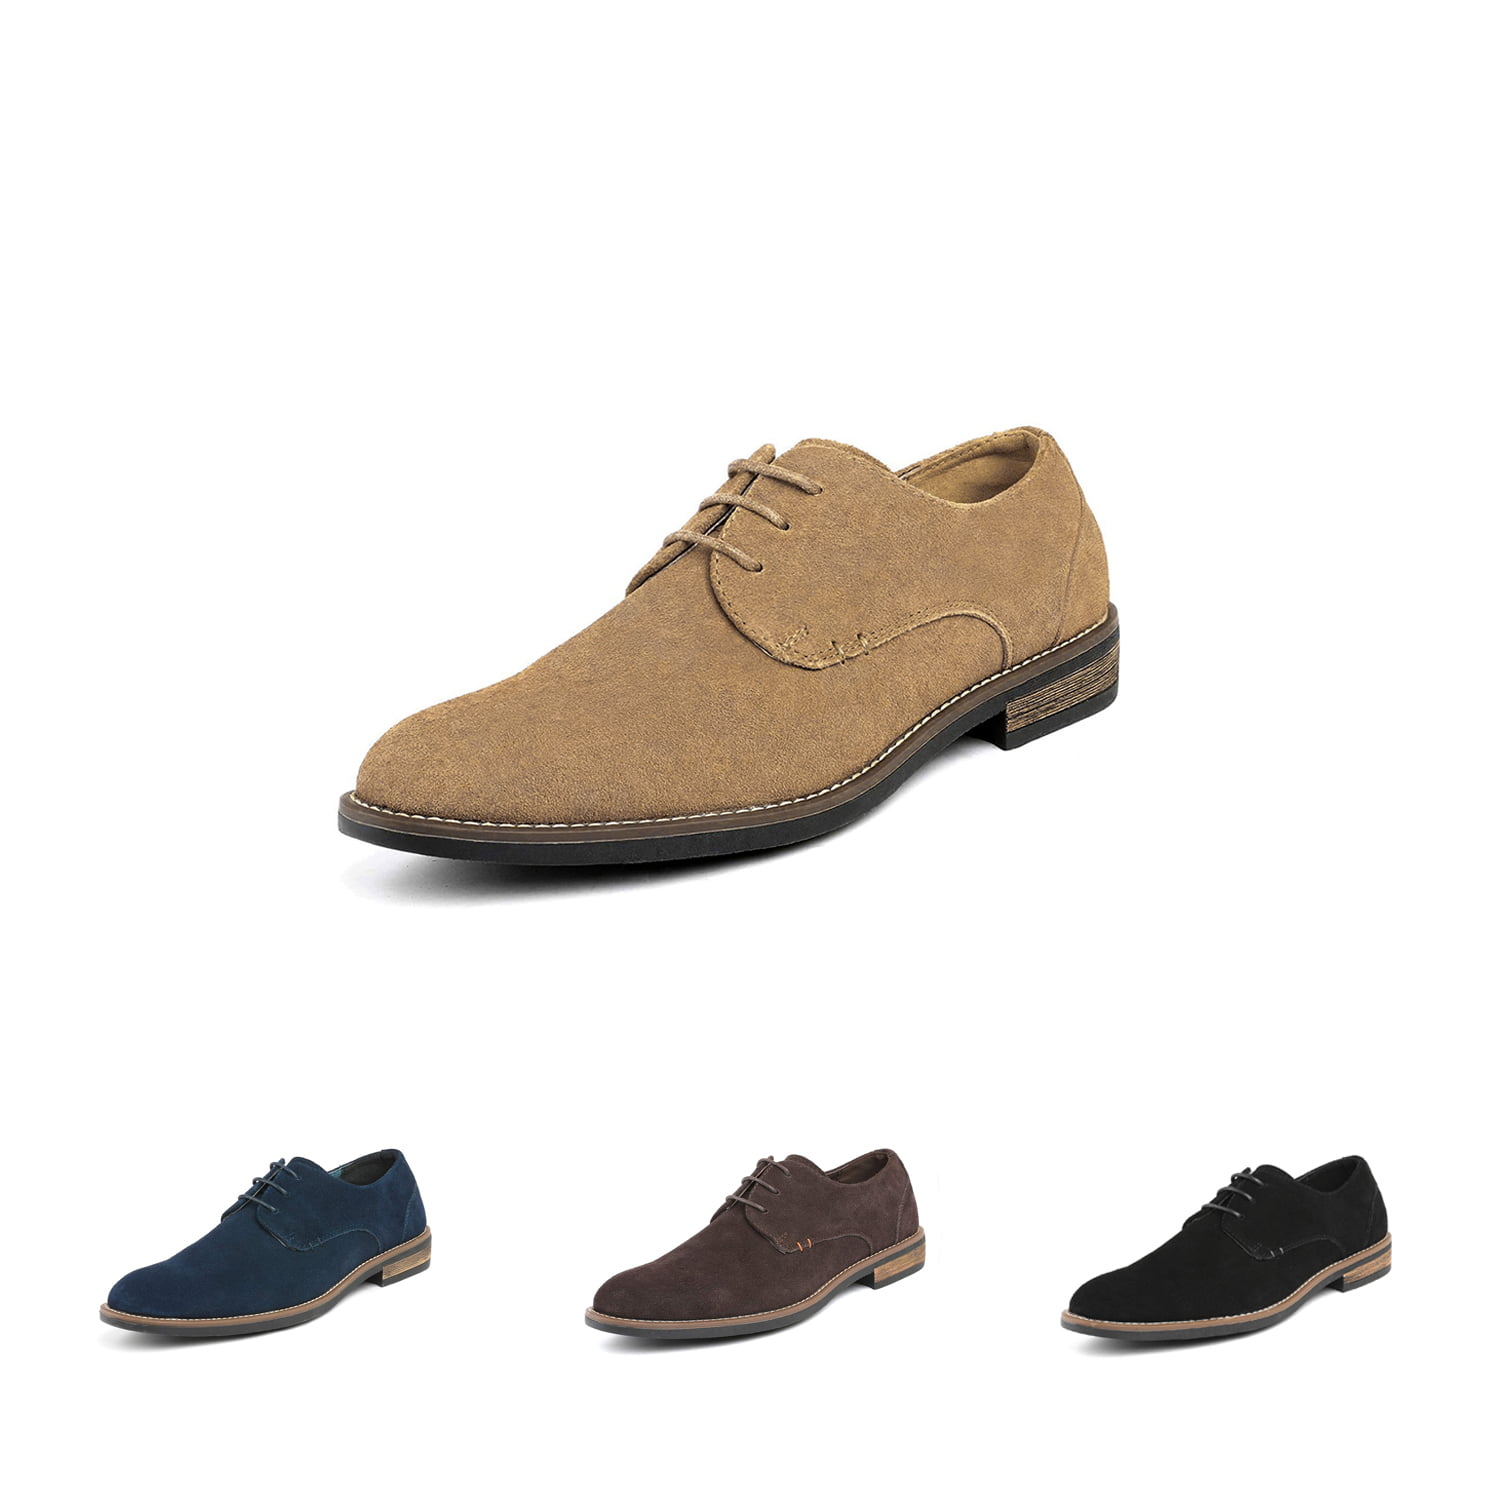 GOLAIMAN Mens Suede Dress Shoes Casual Lace up Oxford Shoes